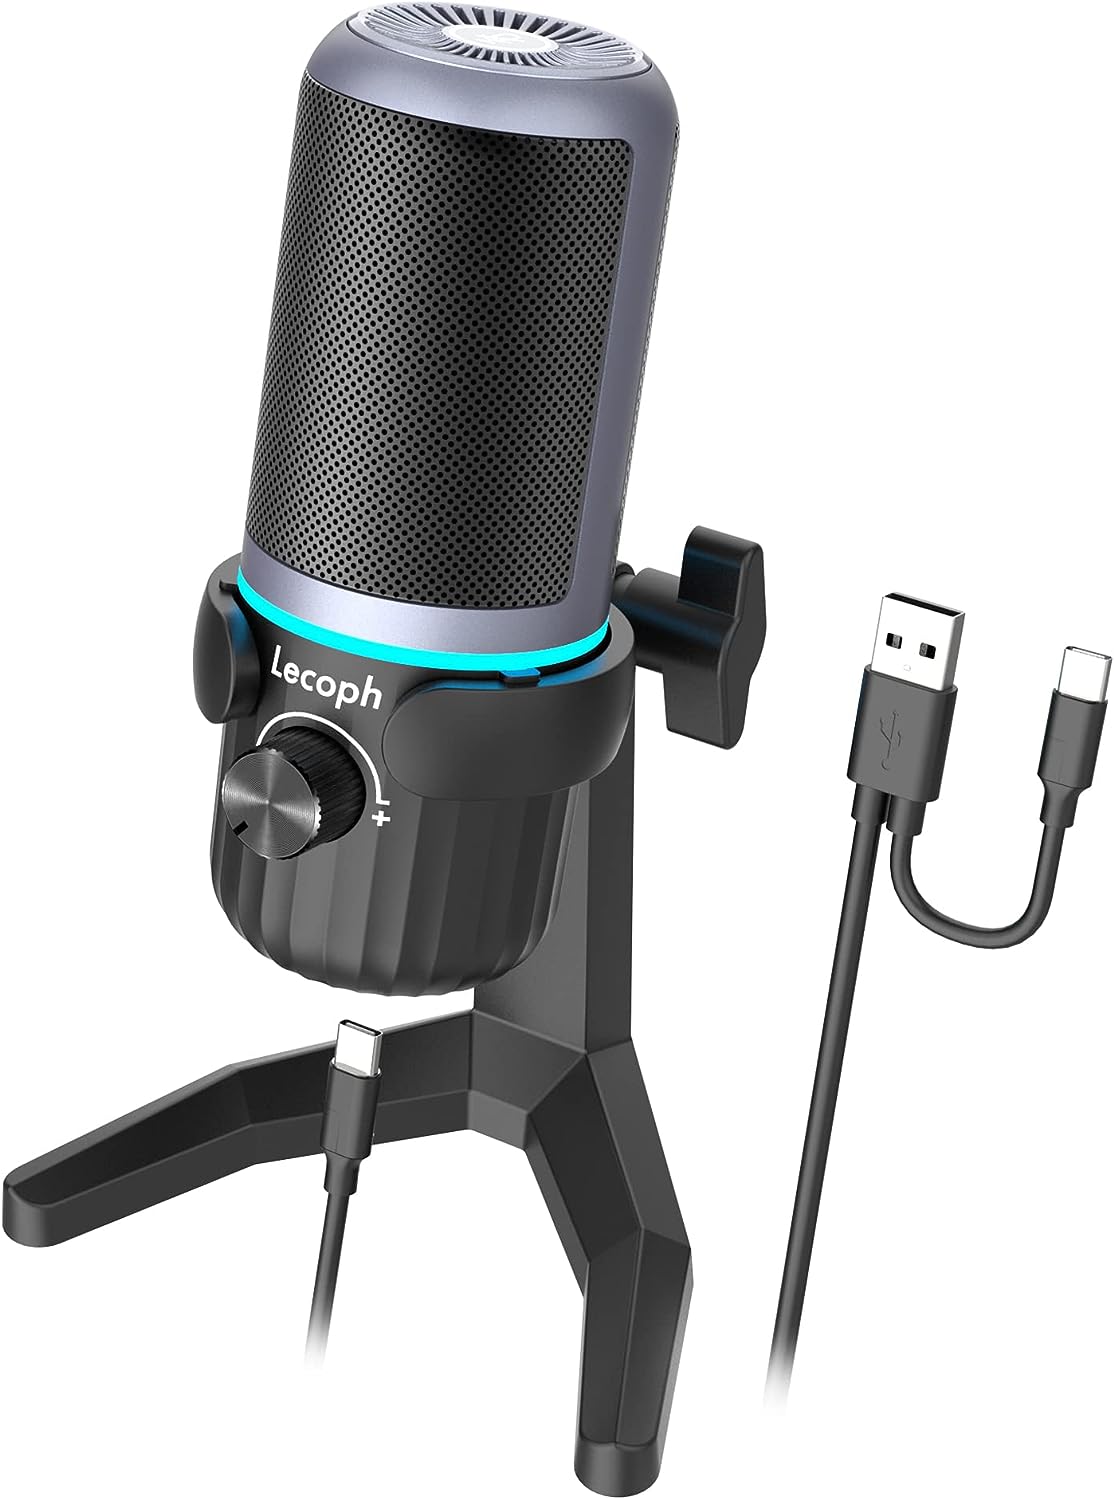 JOUNIVO USB Microphone, Condenser Mic for PC/Laptop with Volume Control and Mute Button, Headphone Output, USB Type A/C Plug and Play, for Streaming, Podcast, Discord